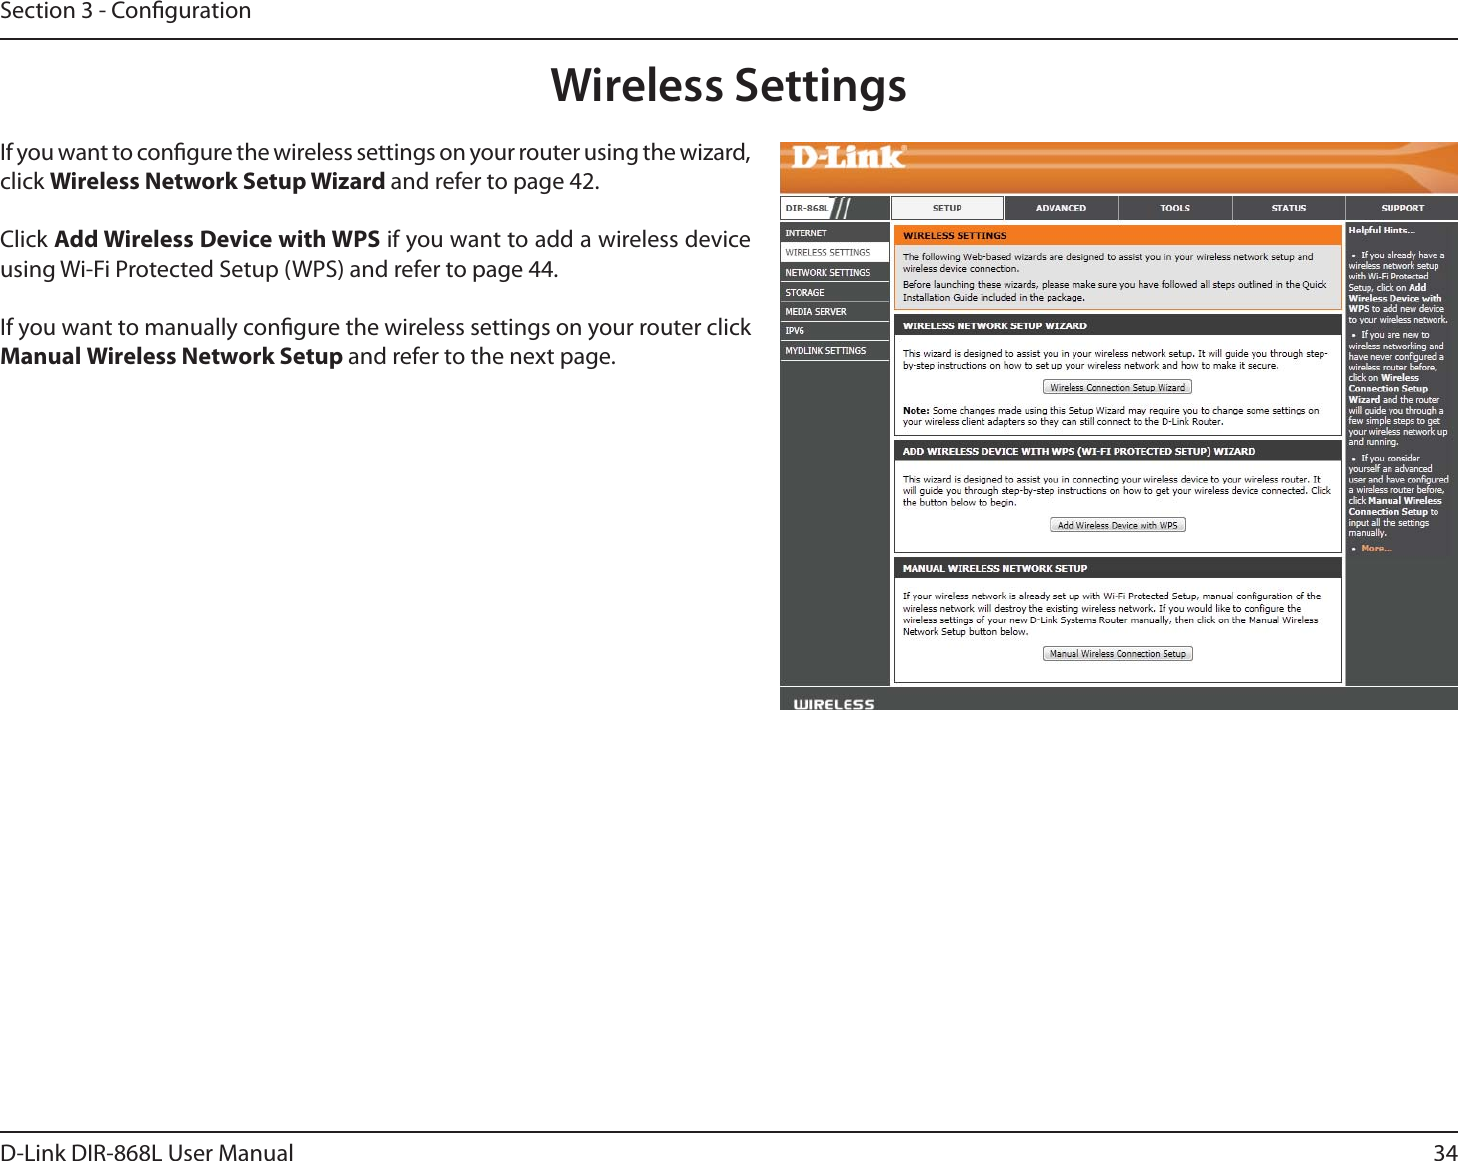 34D-Link DIR-868L User ManualSection 3 - CongurationWireless SettingsIf you want to congure the wireless settings on your router using the wizard, click Wireless Network Setup Wizard and refer to page 42.Click Add Wireless Device with WPS if you want to add a wireless device using Wi-Fi Protected Setup (WPS) and refer to page 44.If you want to manually congure the wireless settings on your router click Manual Wireless Network Setup and refer to the next page.